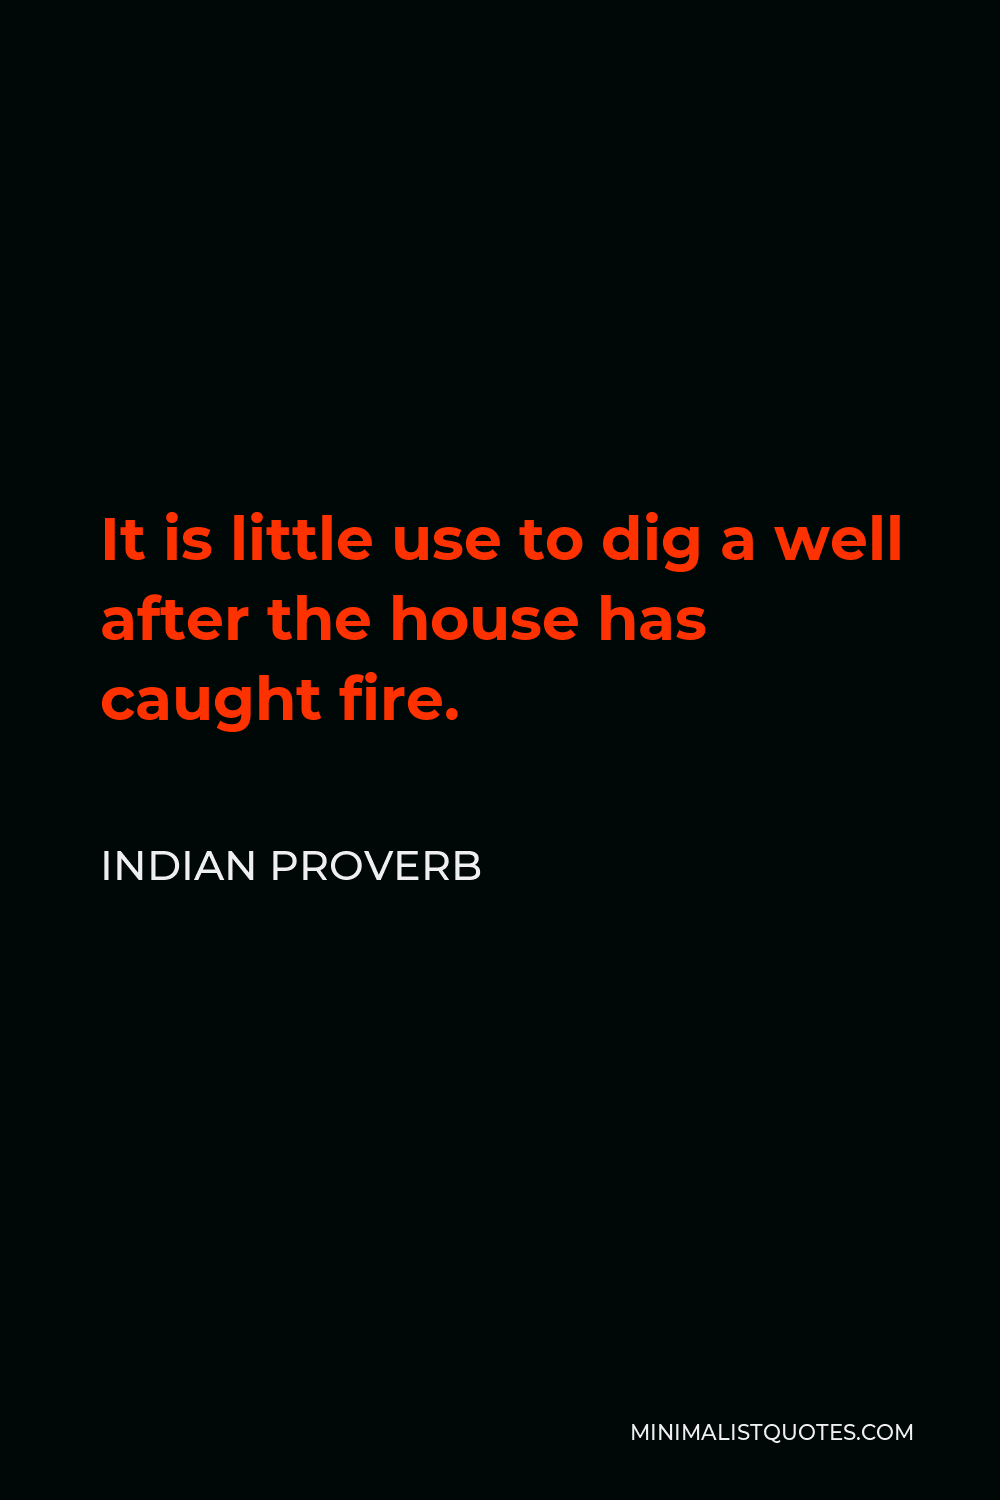 Indian Proverb Quote - It is little use to dig a well after the house has caught fire.